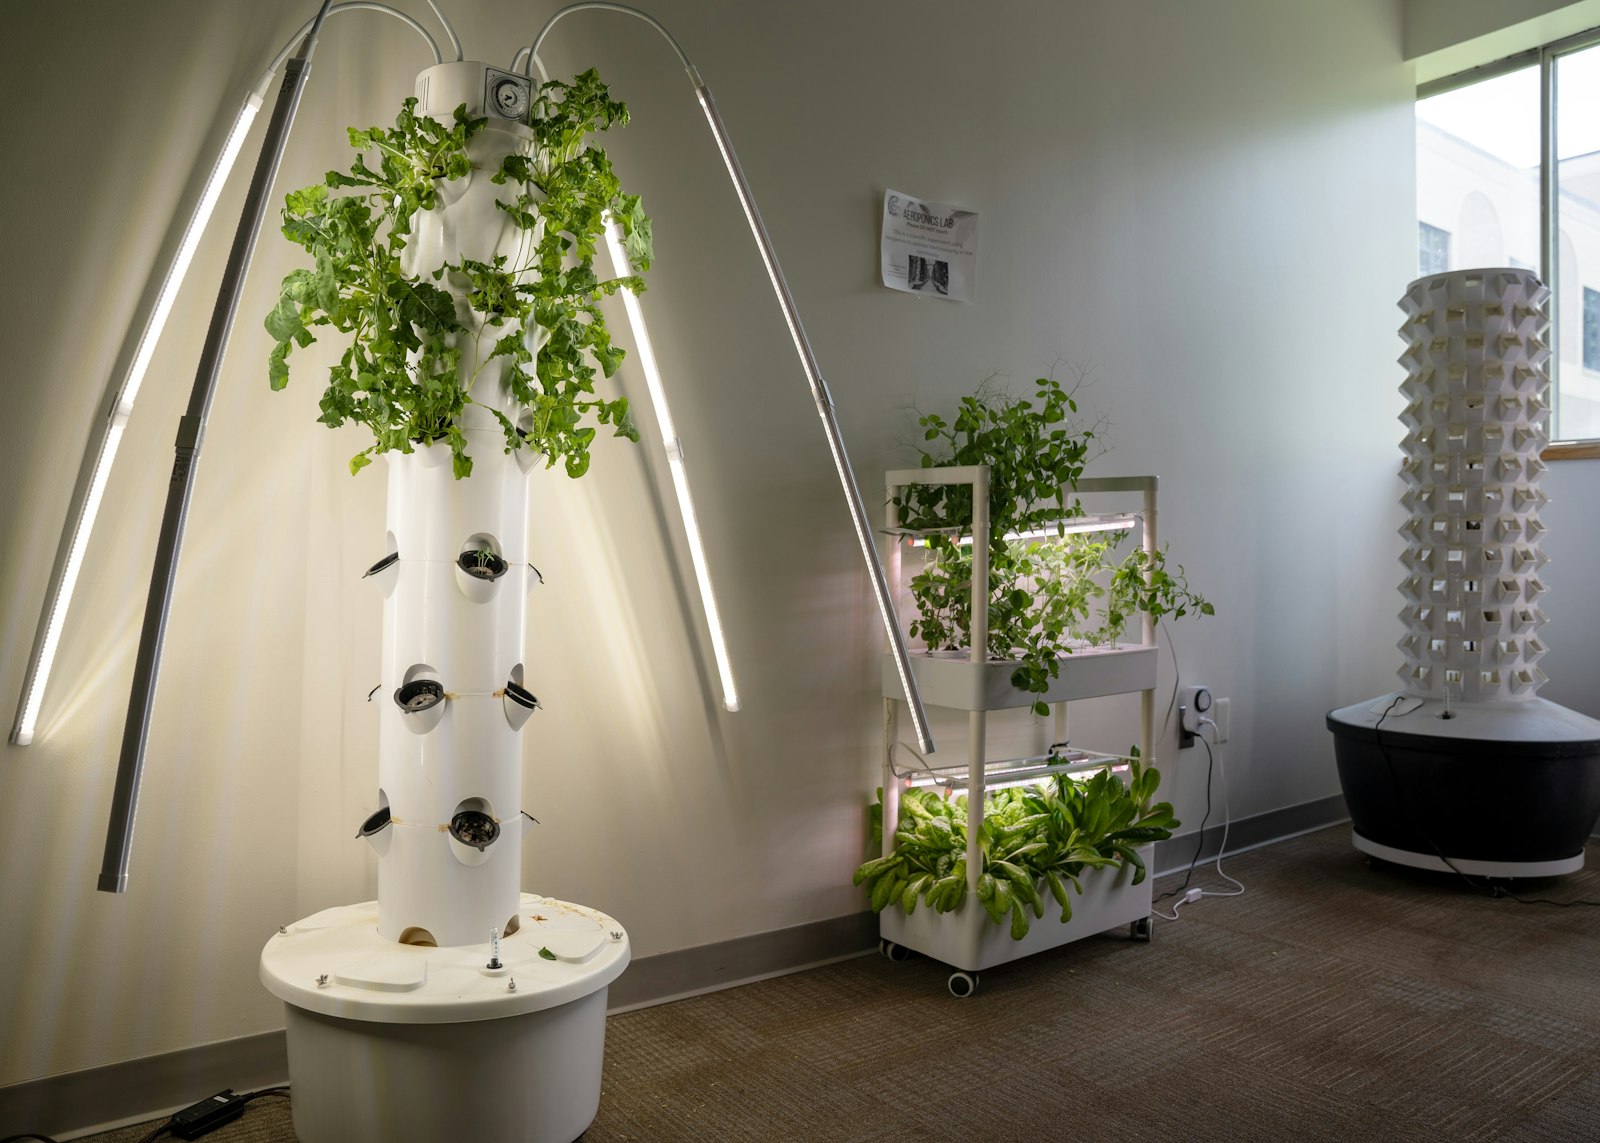 Aeroponics technology uses 90 percent less water and no soil. Alongside two of his students, Olla has set up a small aeroponics garden tucked away in the halls of the college's building.